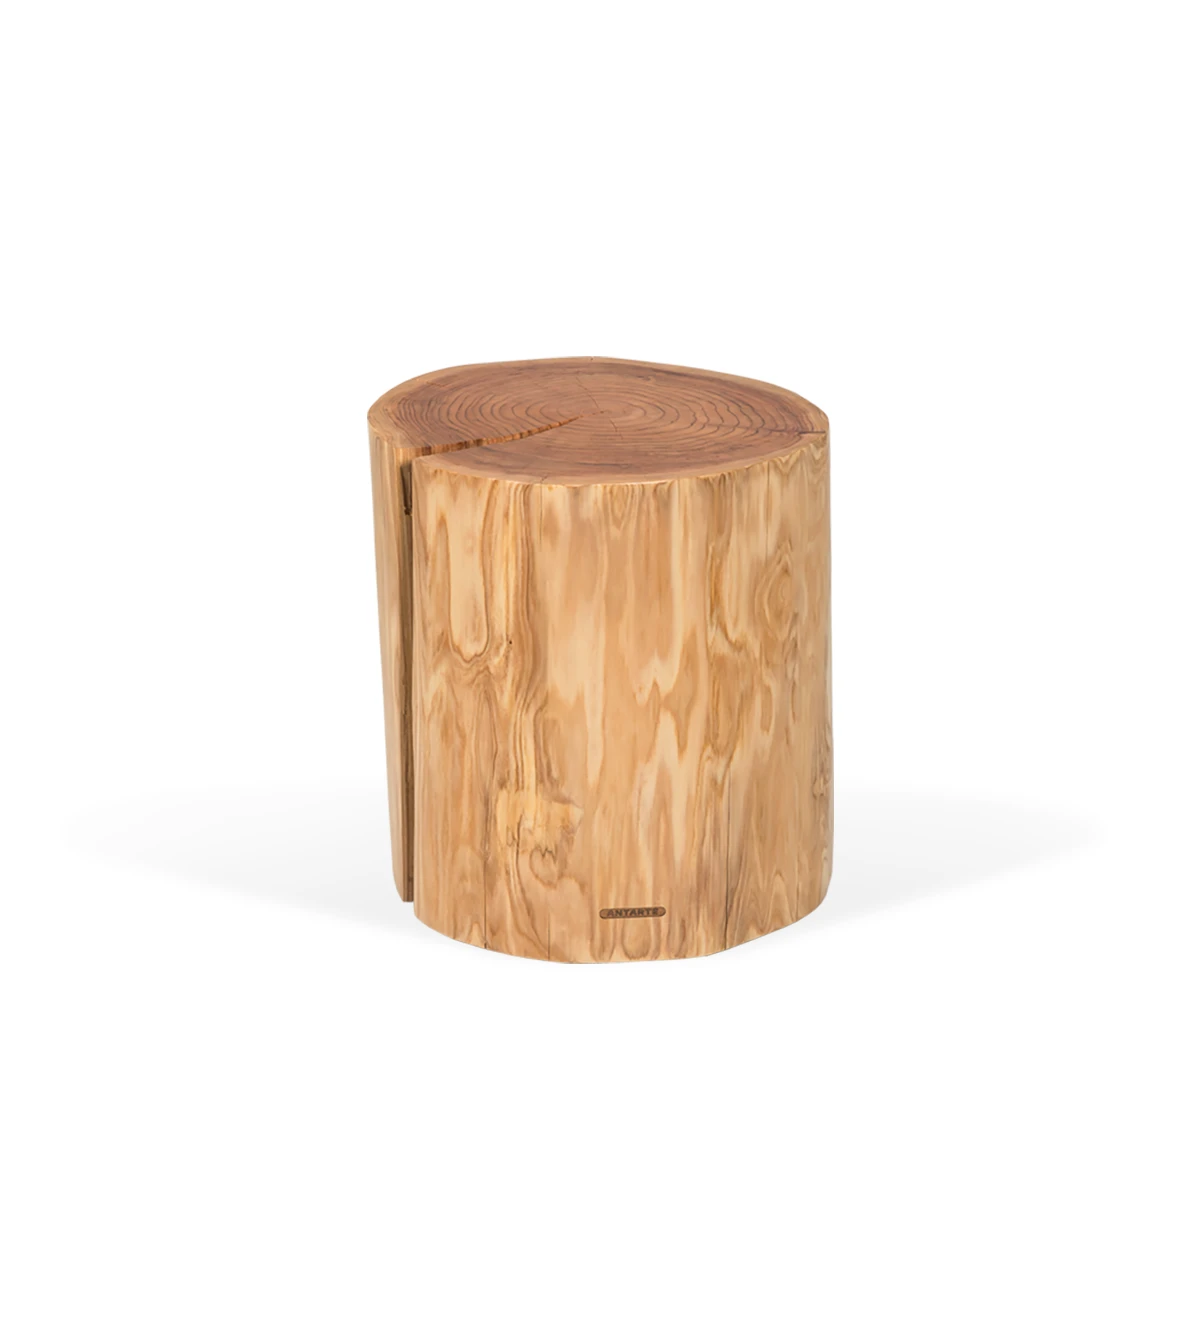 Tall trunk center table in natural cryptomeria wood